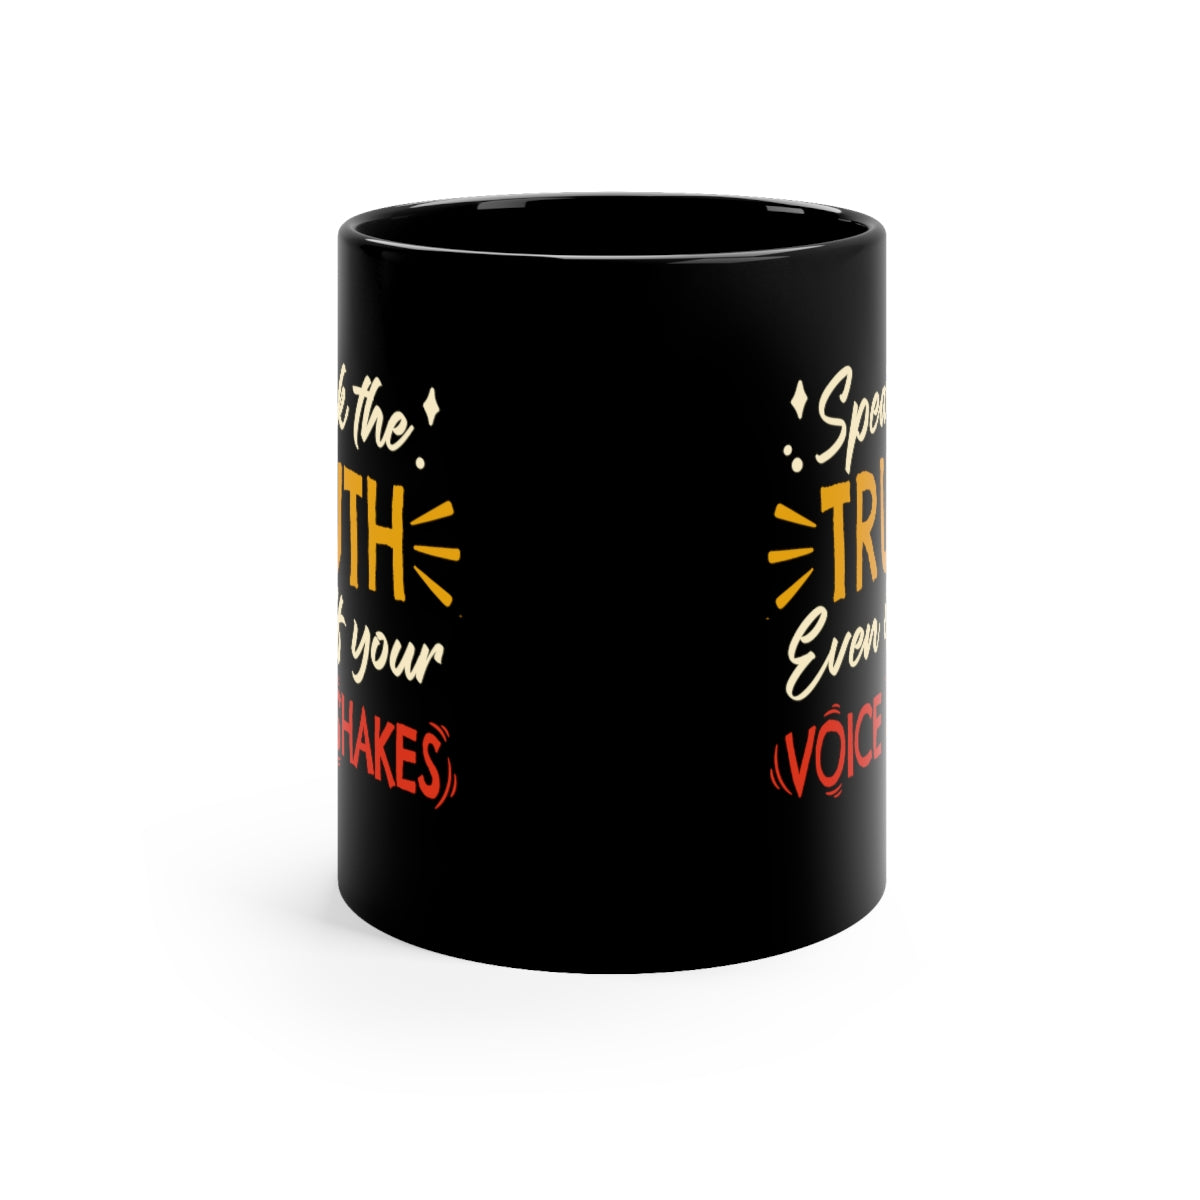 Speak The Truth Even If Your Voice Shakes | 11oz Black Mug - Rise of The New Media